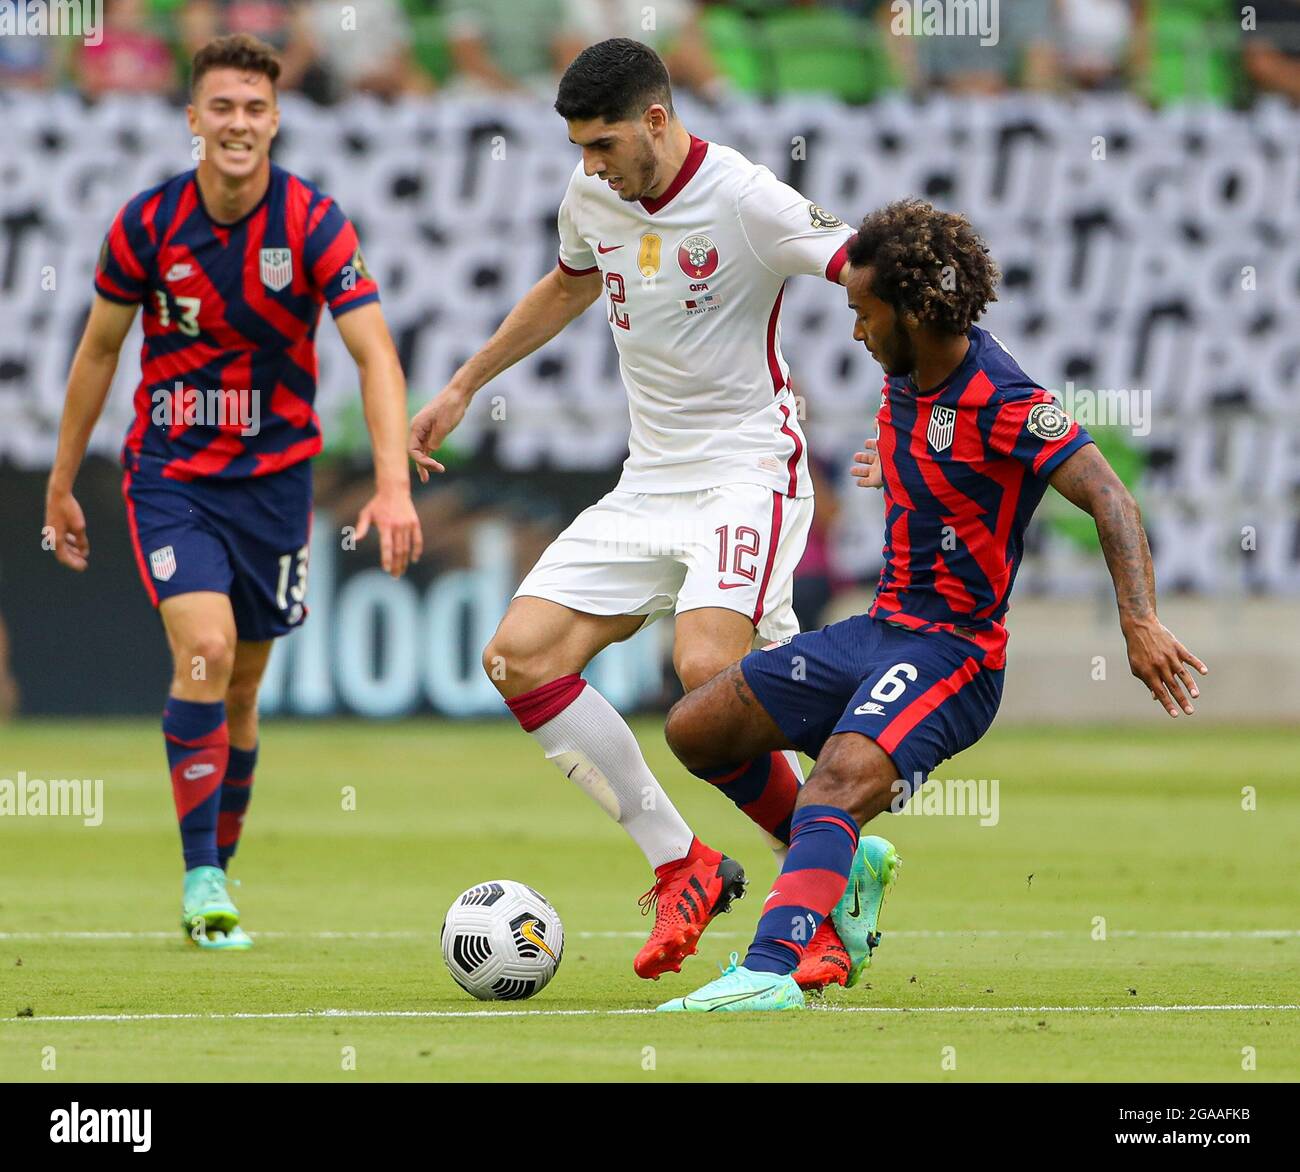 Austin, Texas, USA. 29th July, 2021. Qatar midfielder KARIM BOUDIAF (12) works around United States forward GIANLUCA BUSIO (6) during the first half of the Concacaf Gold Cup semifinal between the United States and Qatar on July 29, 2021 in Austin, Texas. The United States won 1-0. (Credit Image: © Scott Coleman/ZUMA Press Wire) Stock Photo